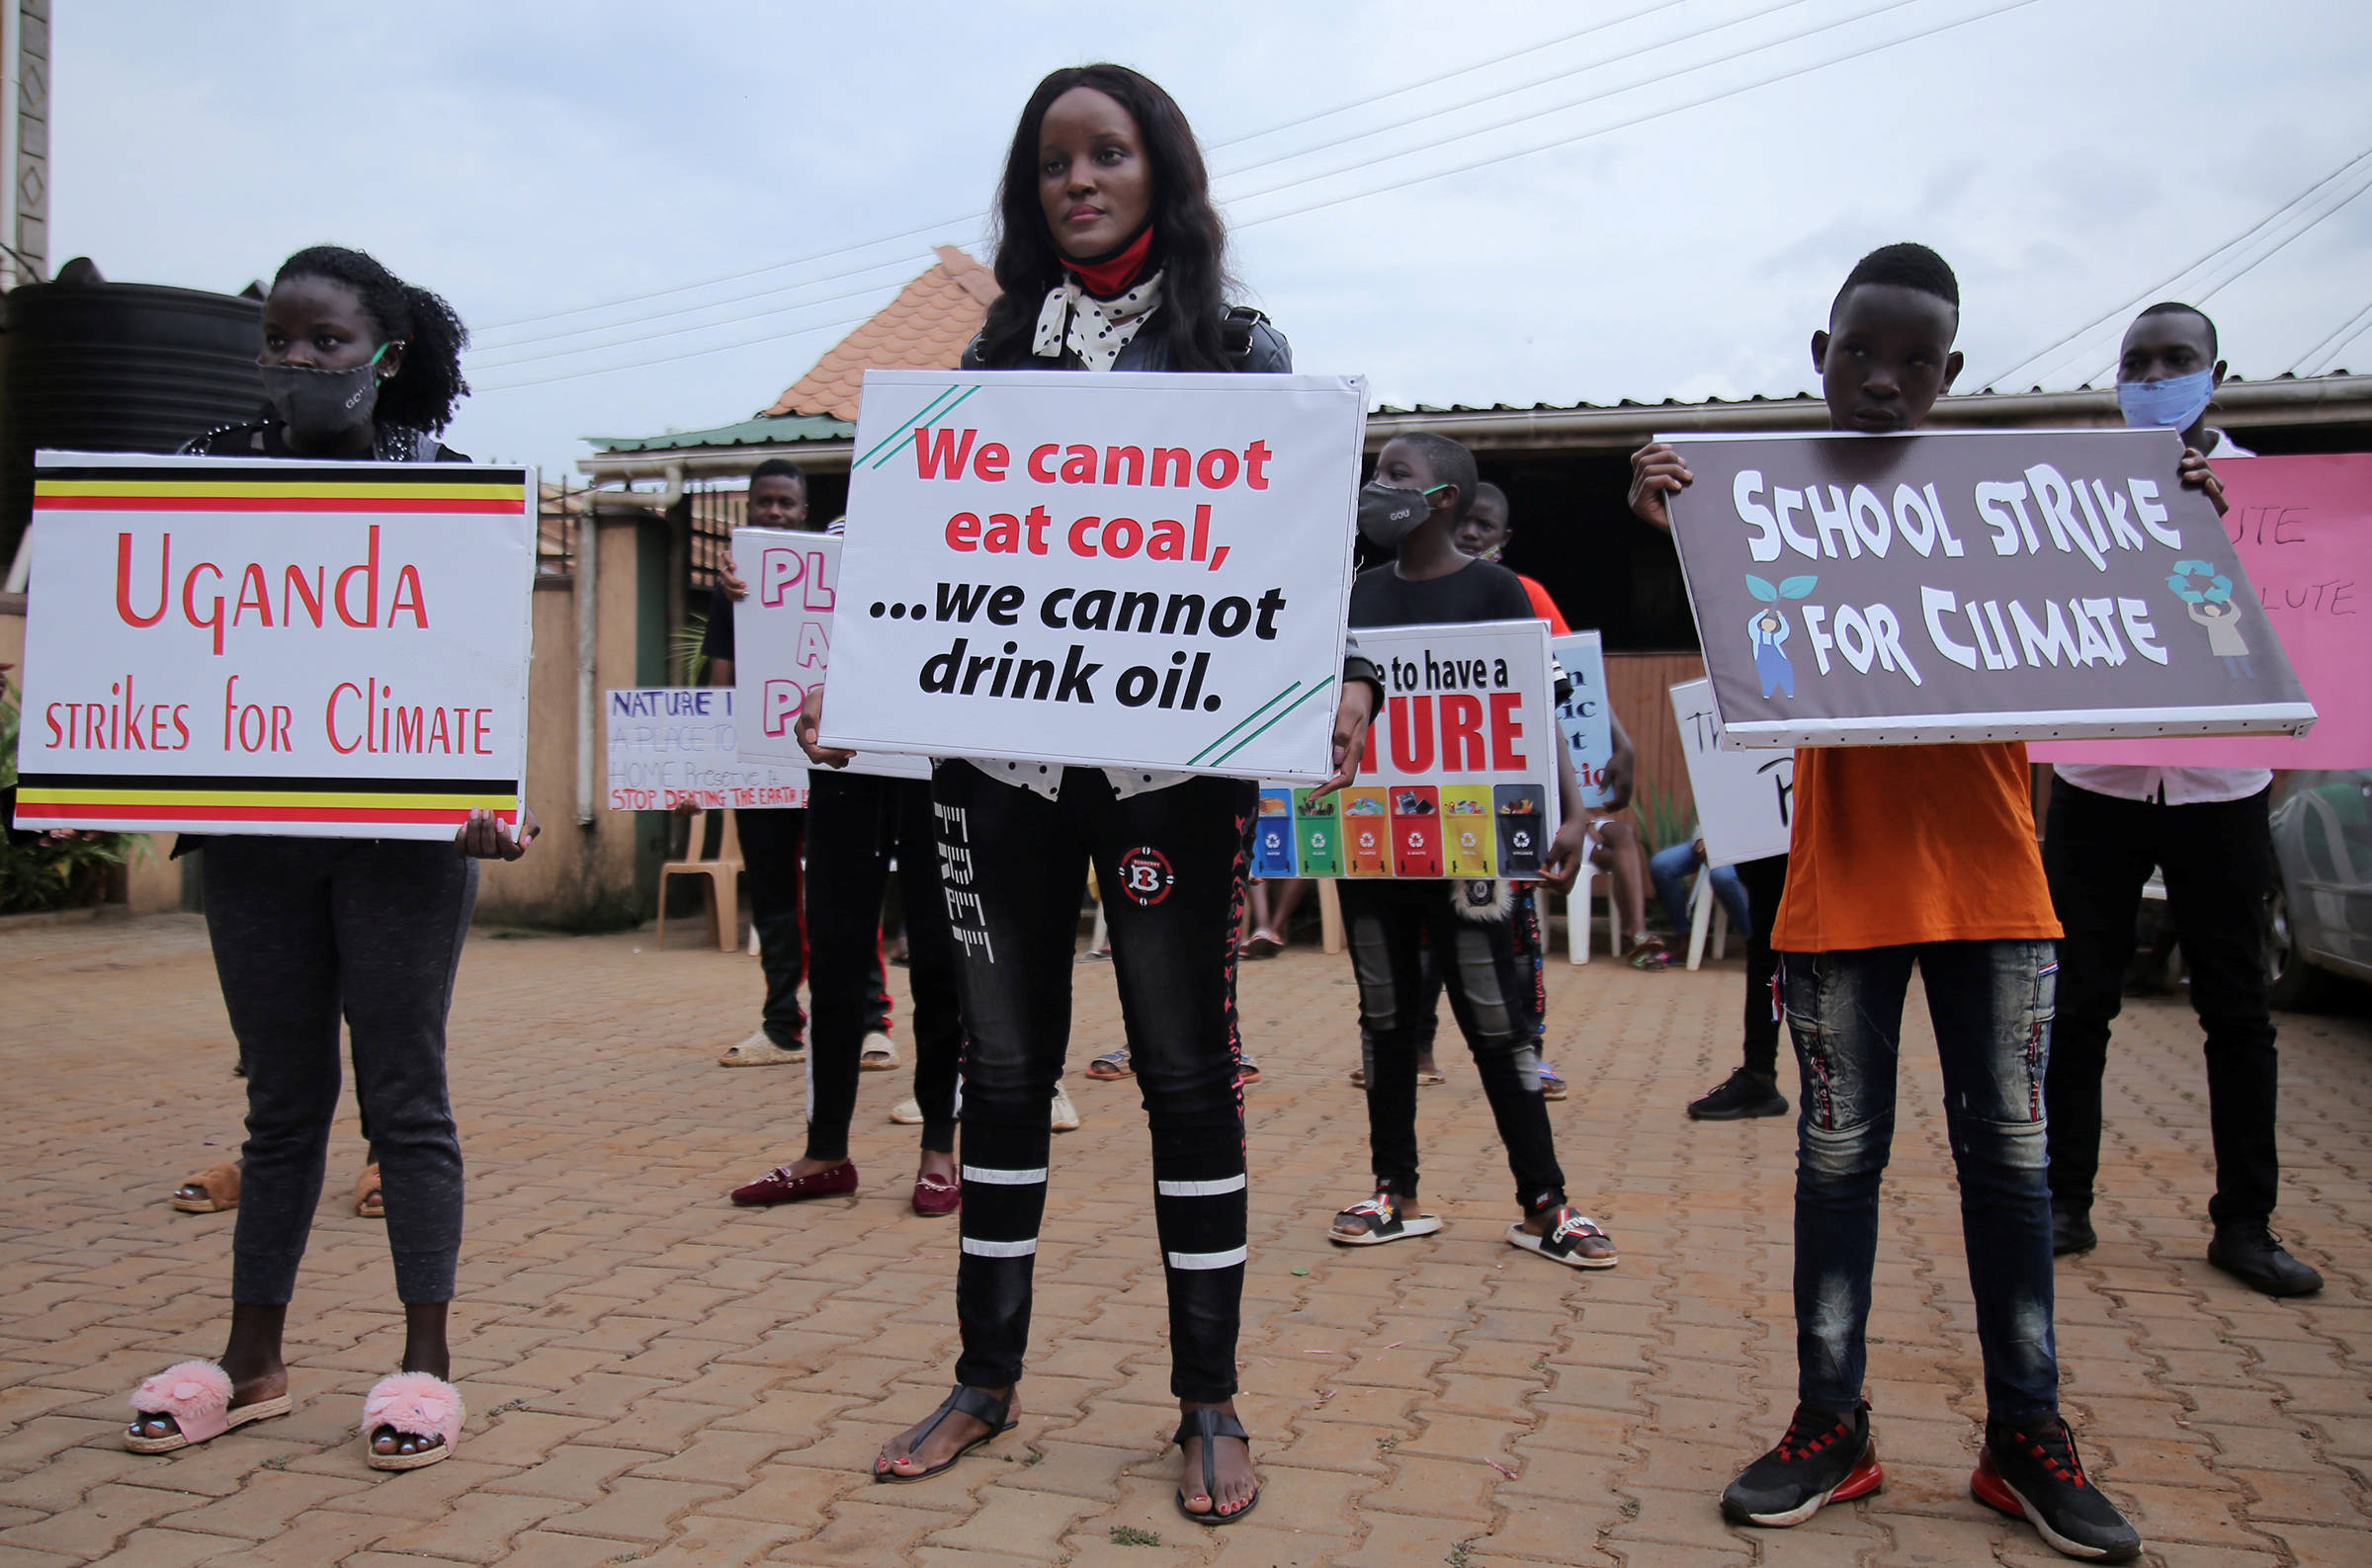 Nakate and other activists protest in Kampala, Uganda on Sept. 25, 2020.